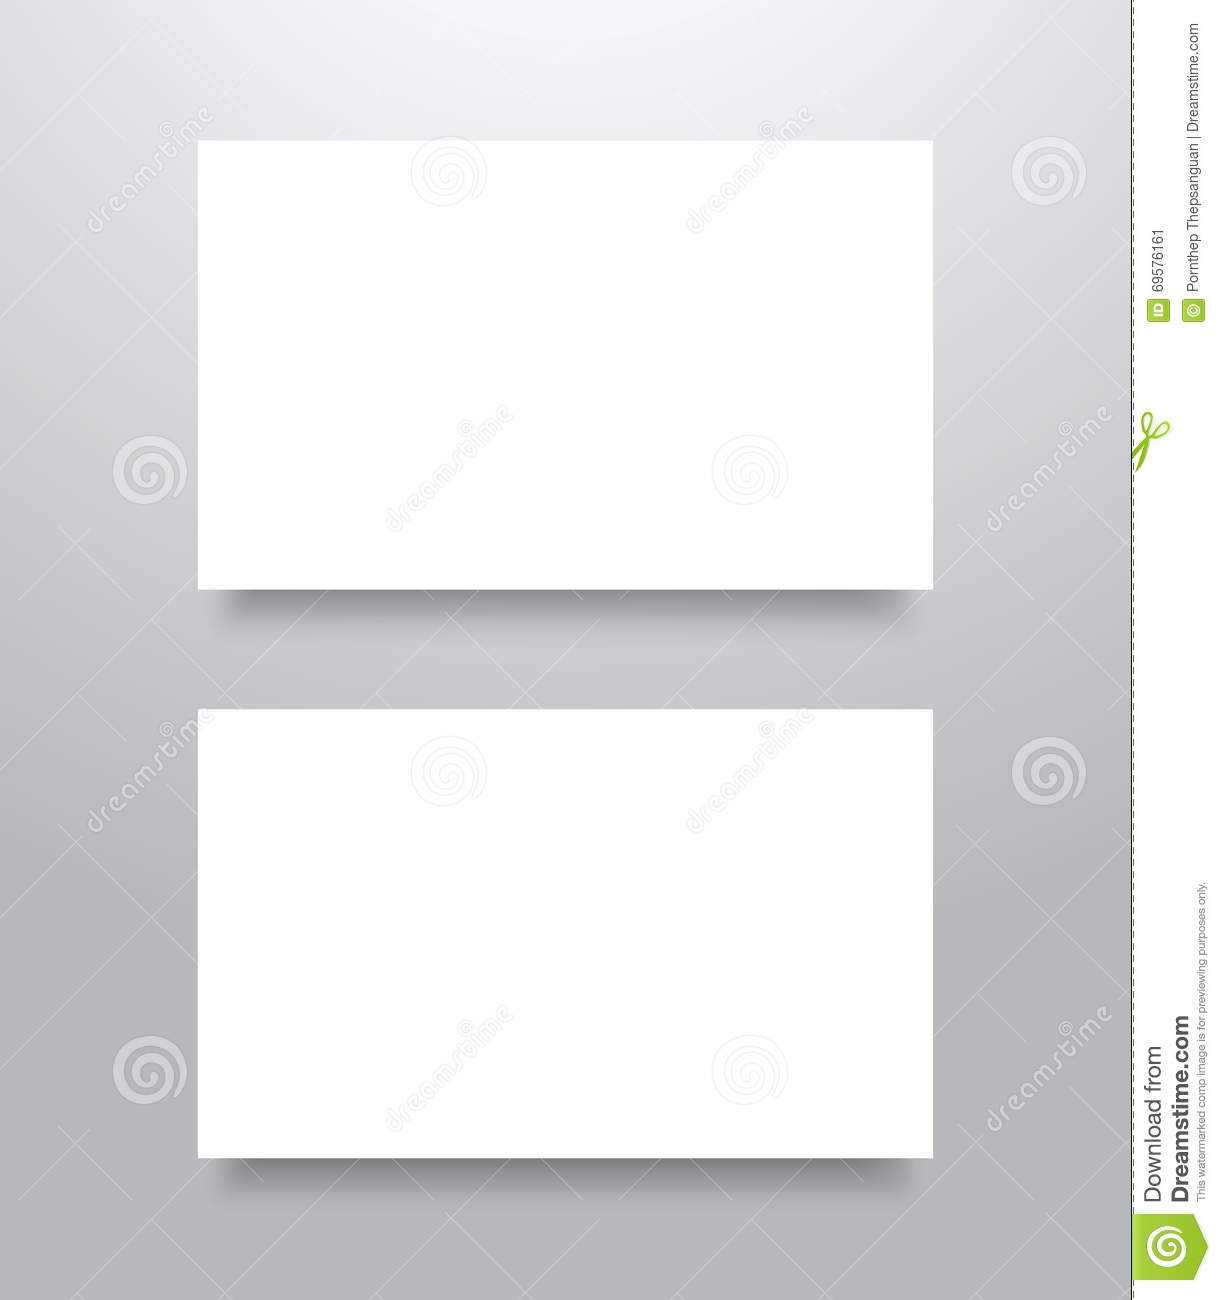 Blank Business Card Mockup Stock Vector. Illustration Of With Regard To Blank Business Card Template Download